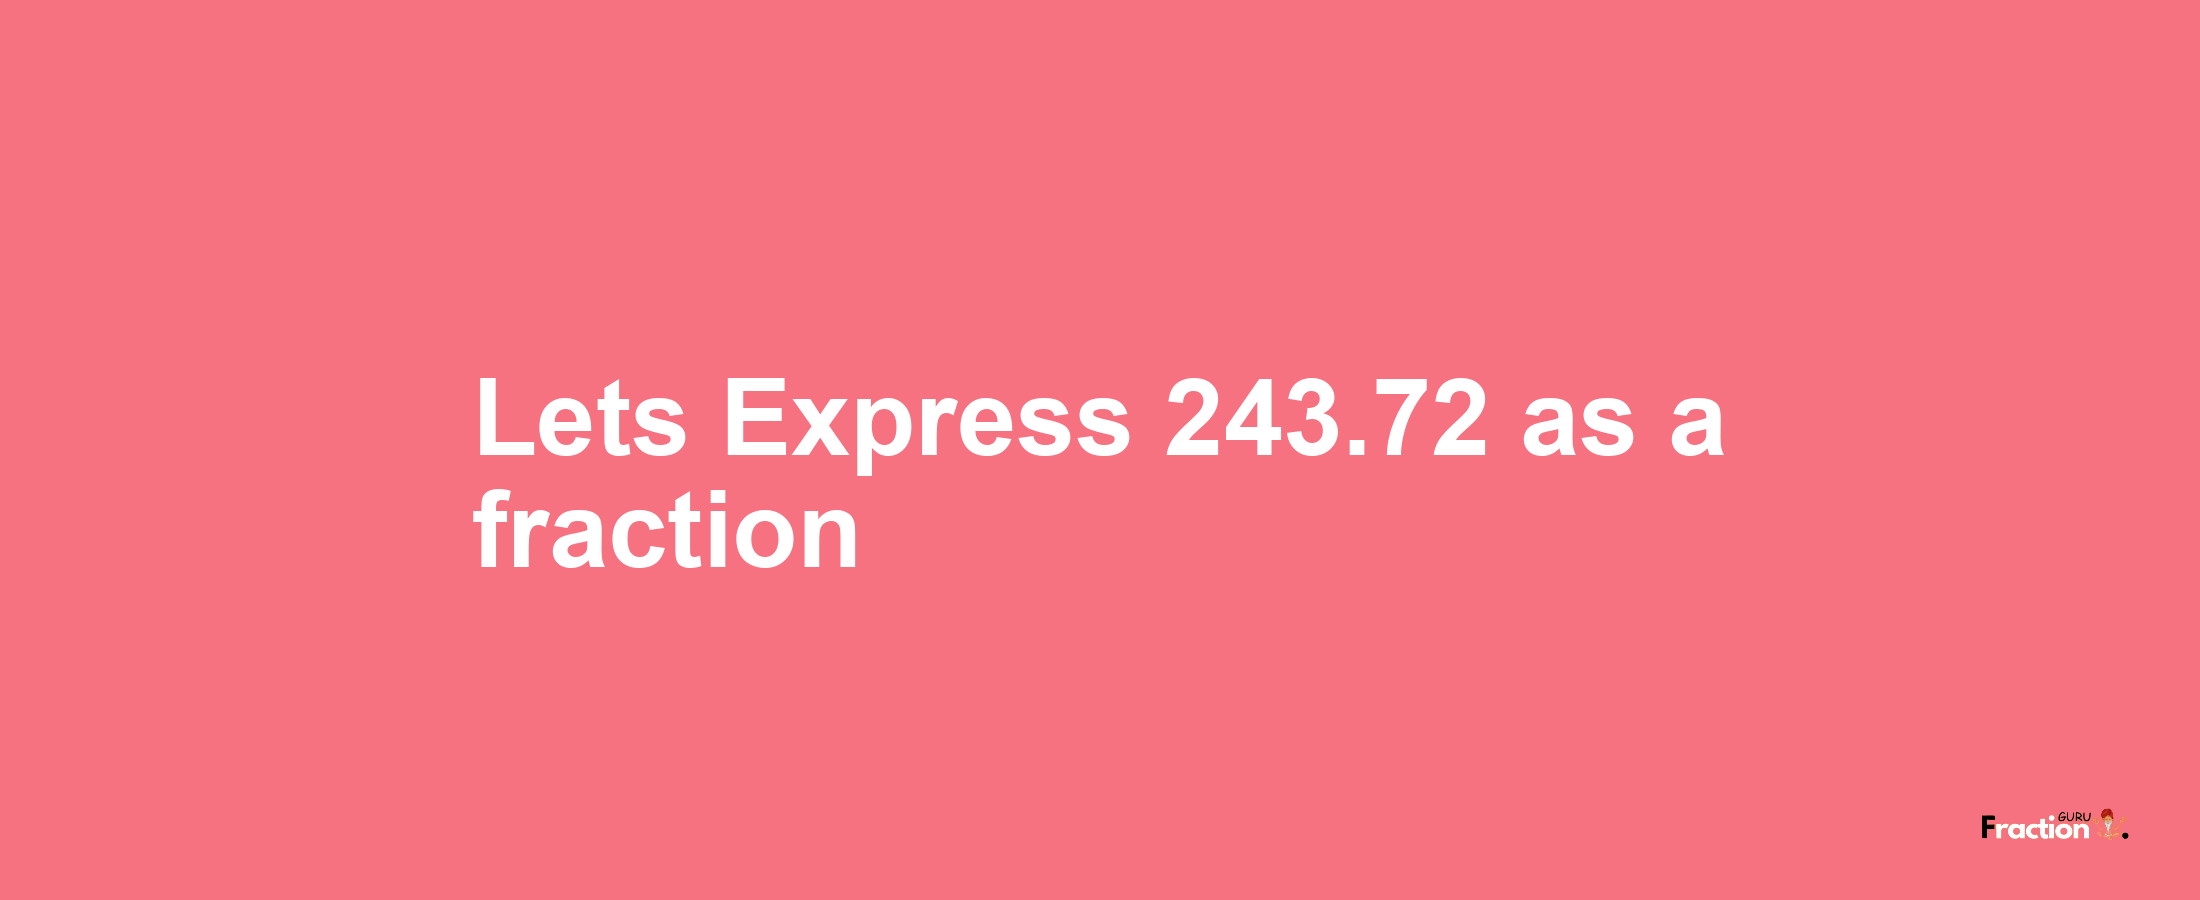 Lets Express 243.72 as afraction